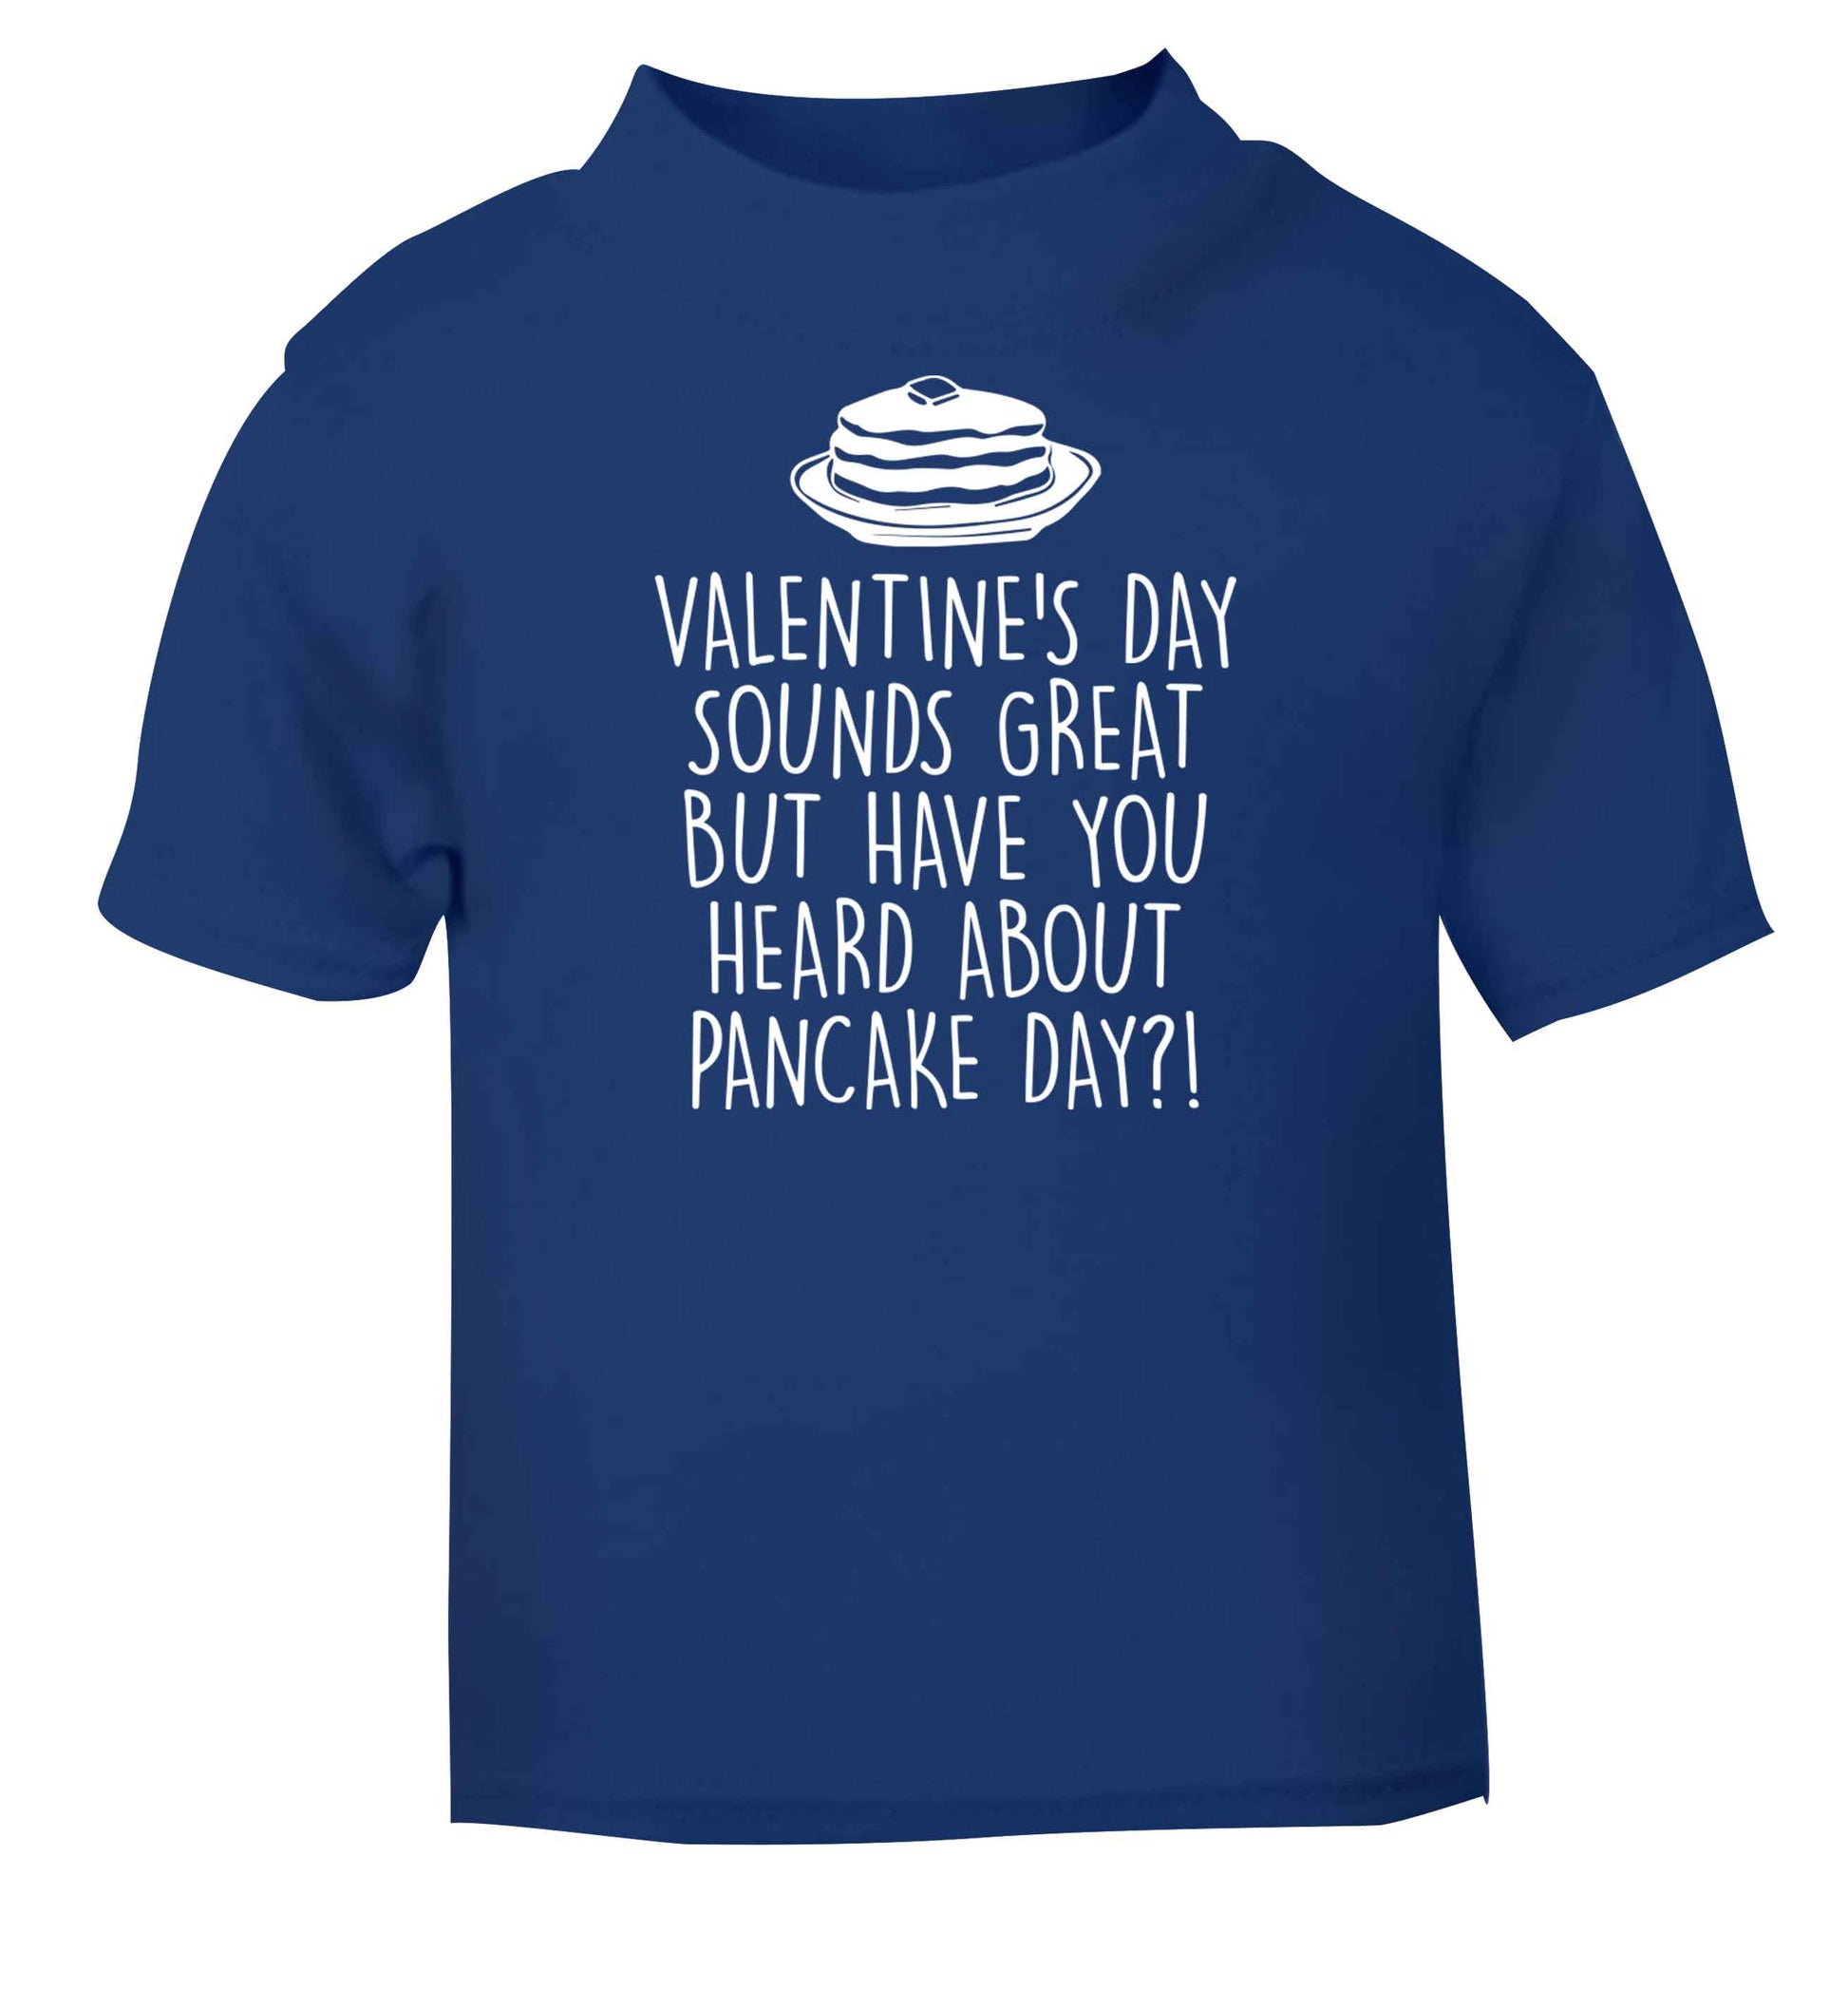 Valentine's day sounds great but have you heard about pancake day?! blue baby toddler Tshirt 2 Years